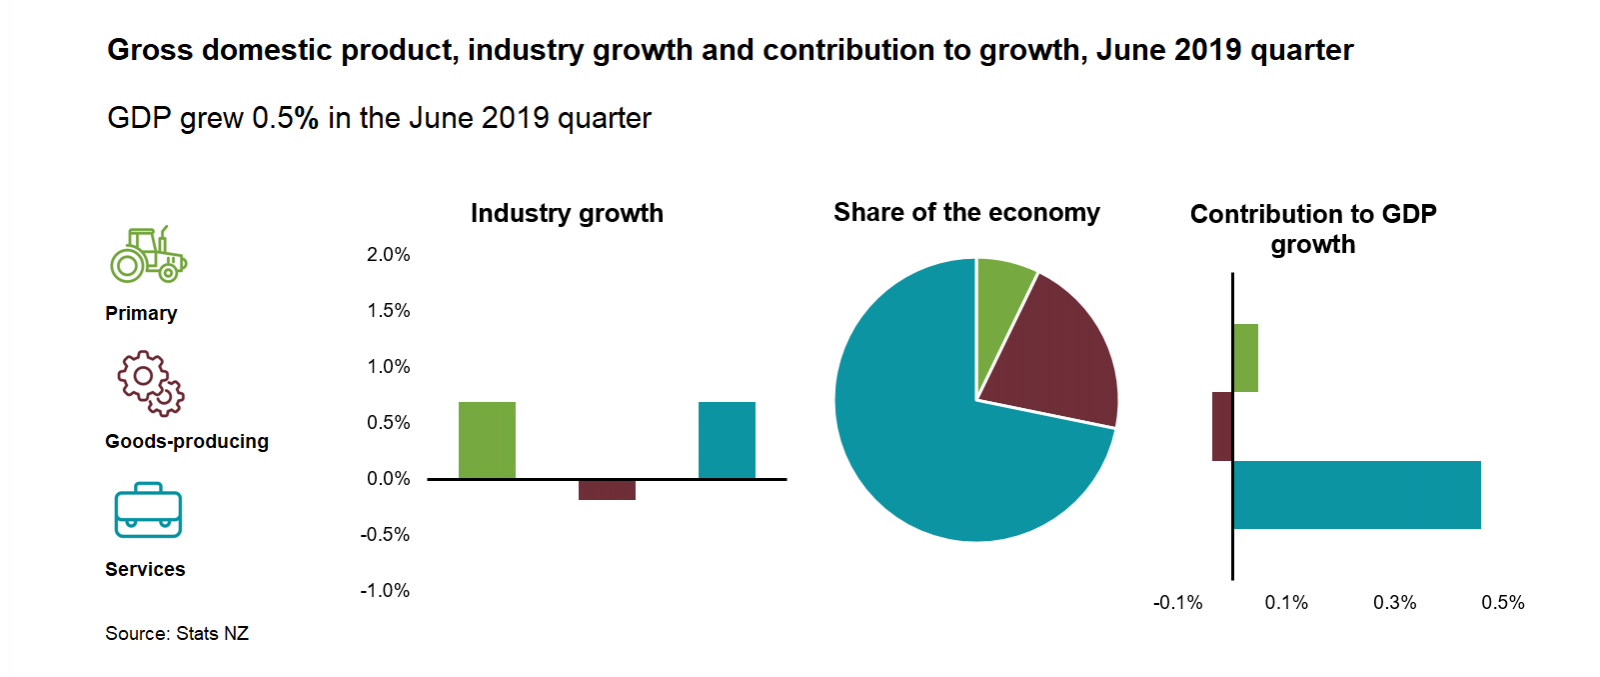 Diagram showing Gross domestic product, industry growth and contribution to growth, June 2019 quarter. Text alternative available below diagram.